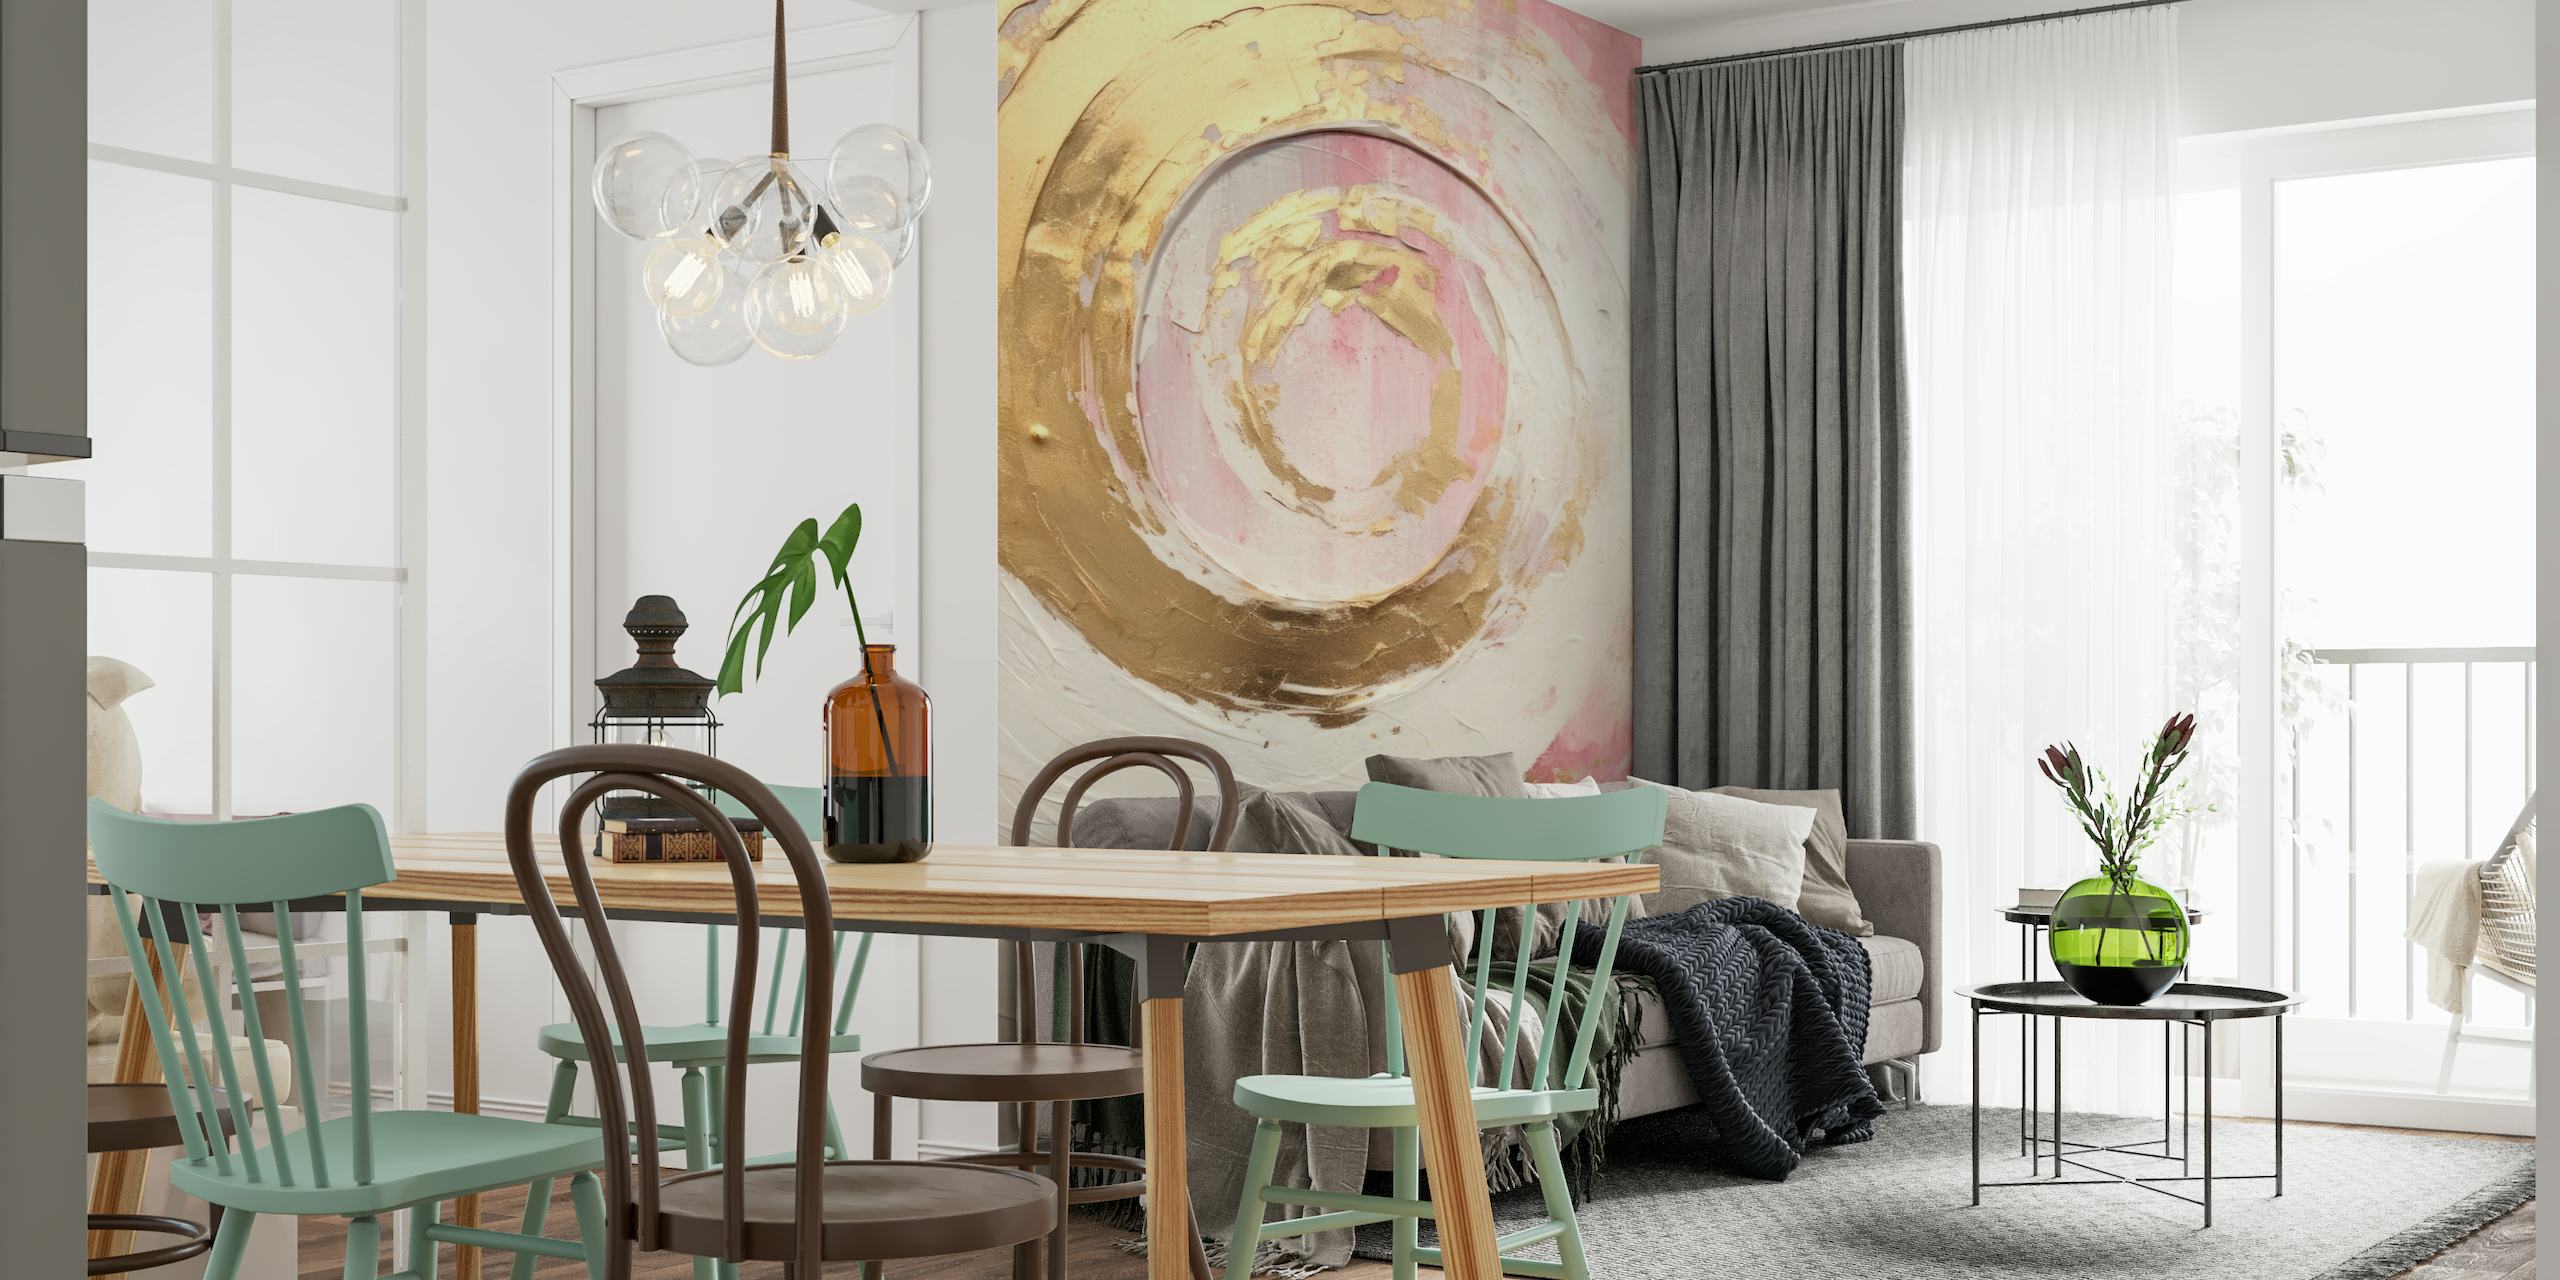 ABSTRACT ART Dynamic - pink and golden style behang